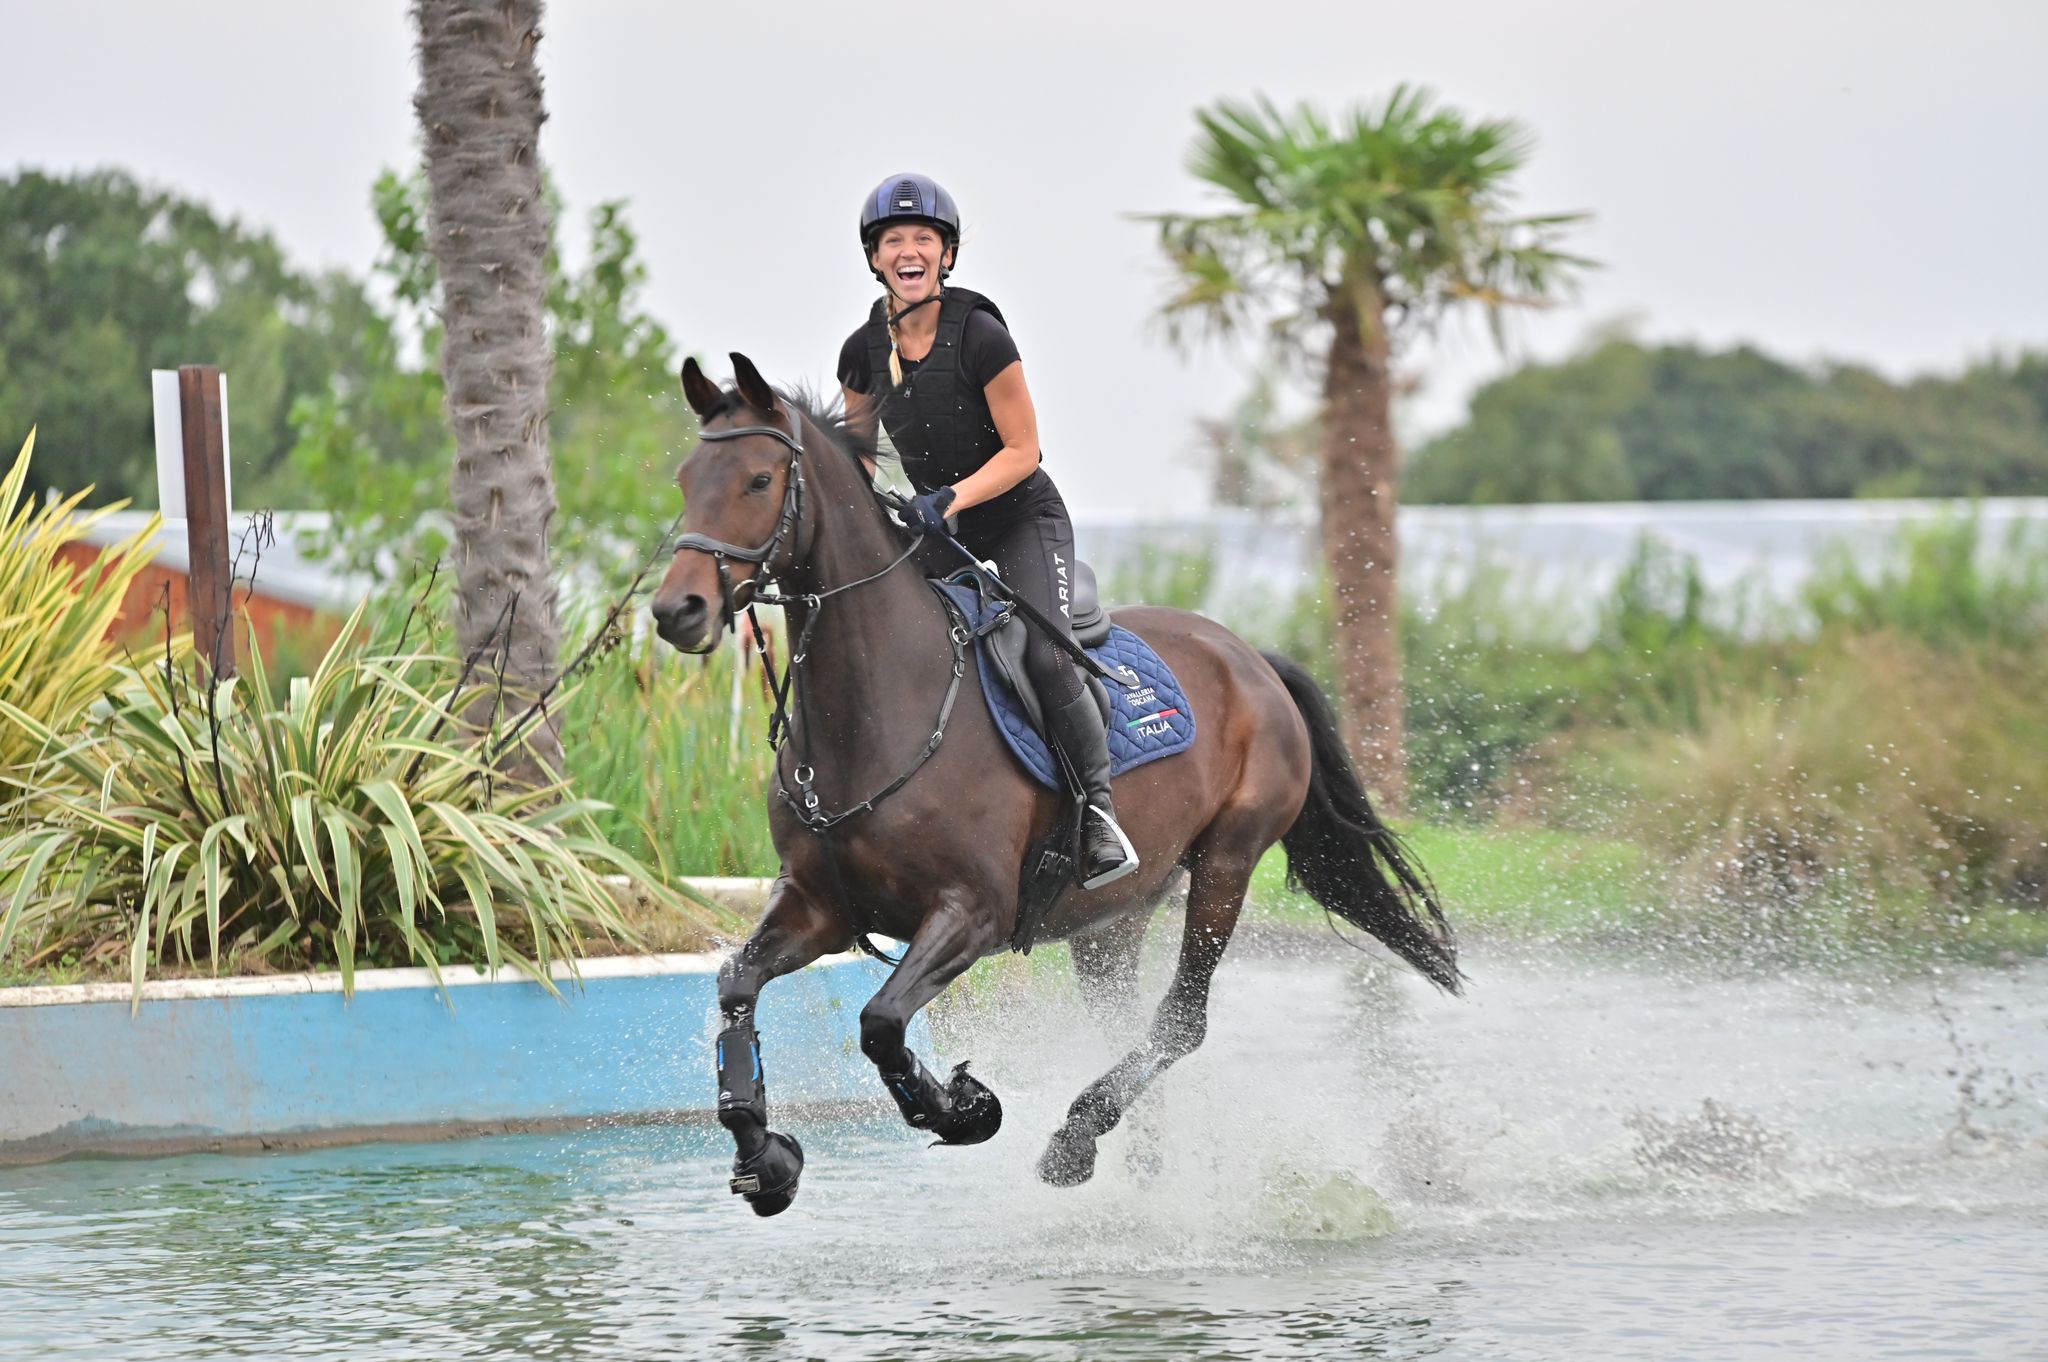 Rider galloping horse through water and smiling.